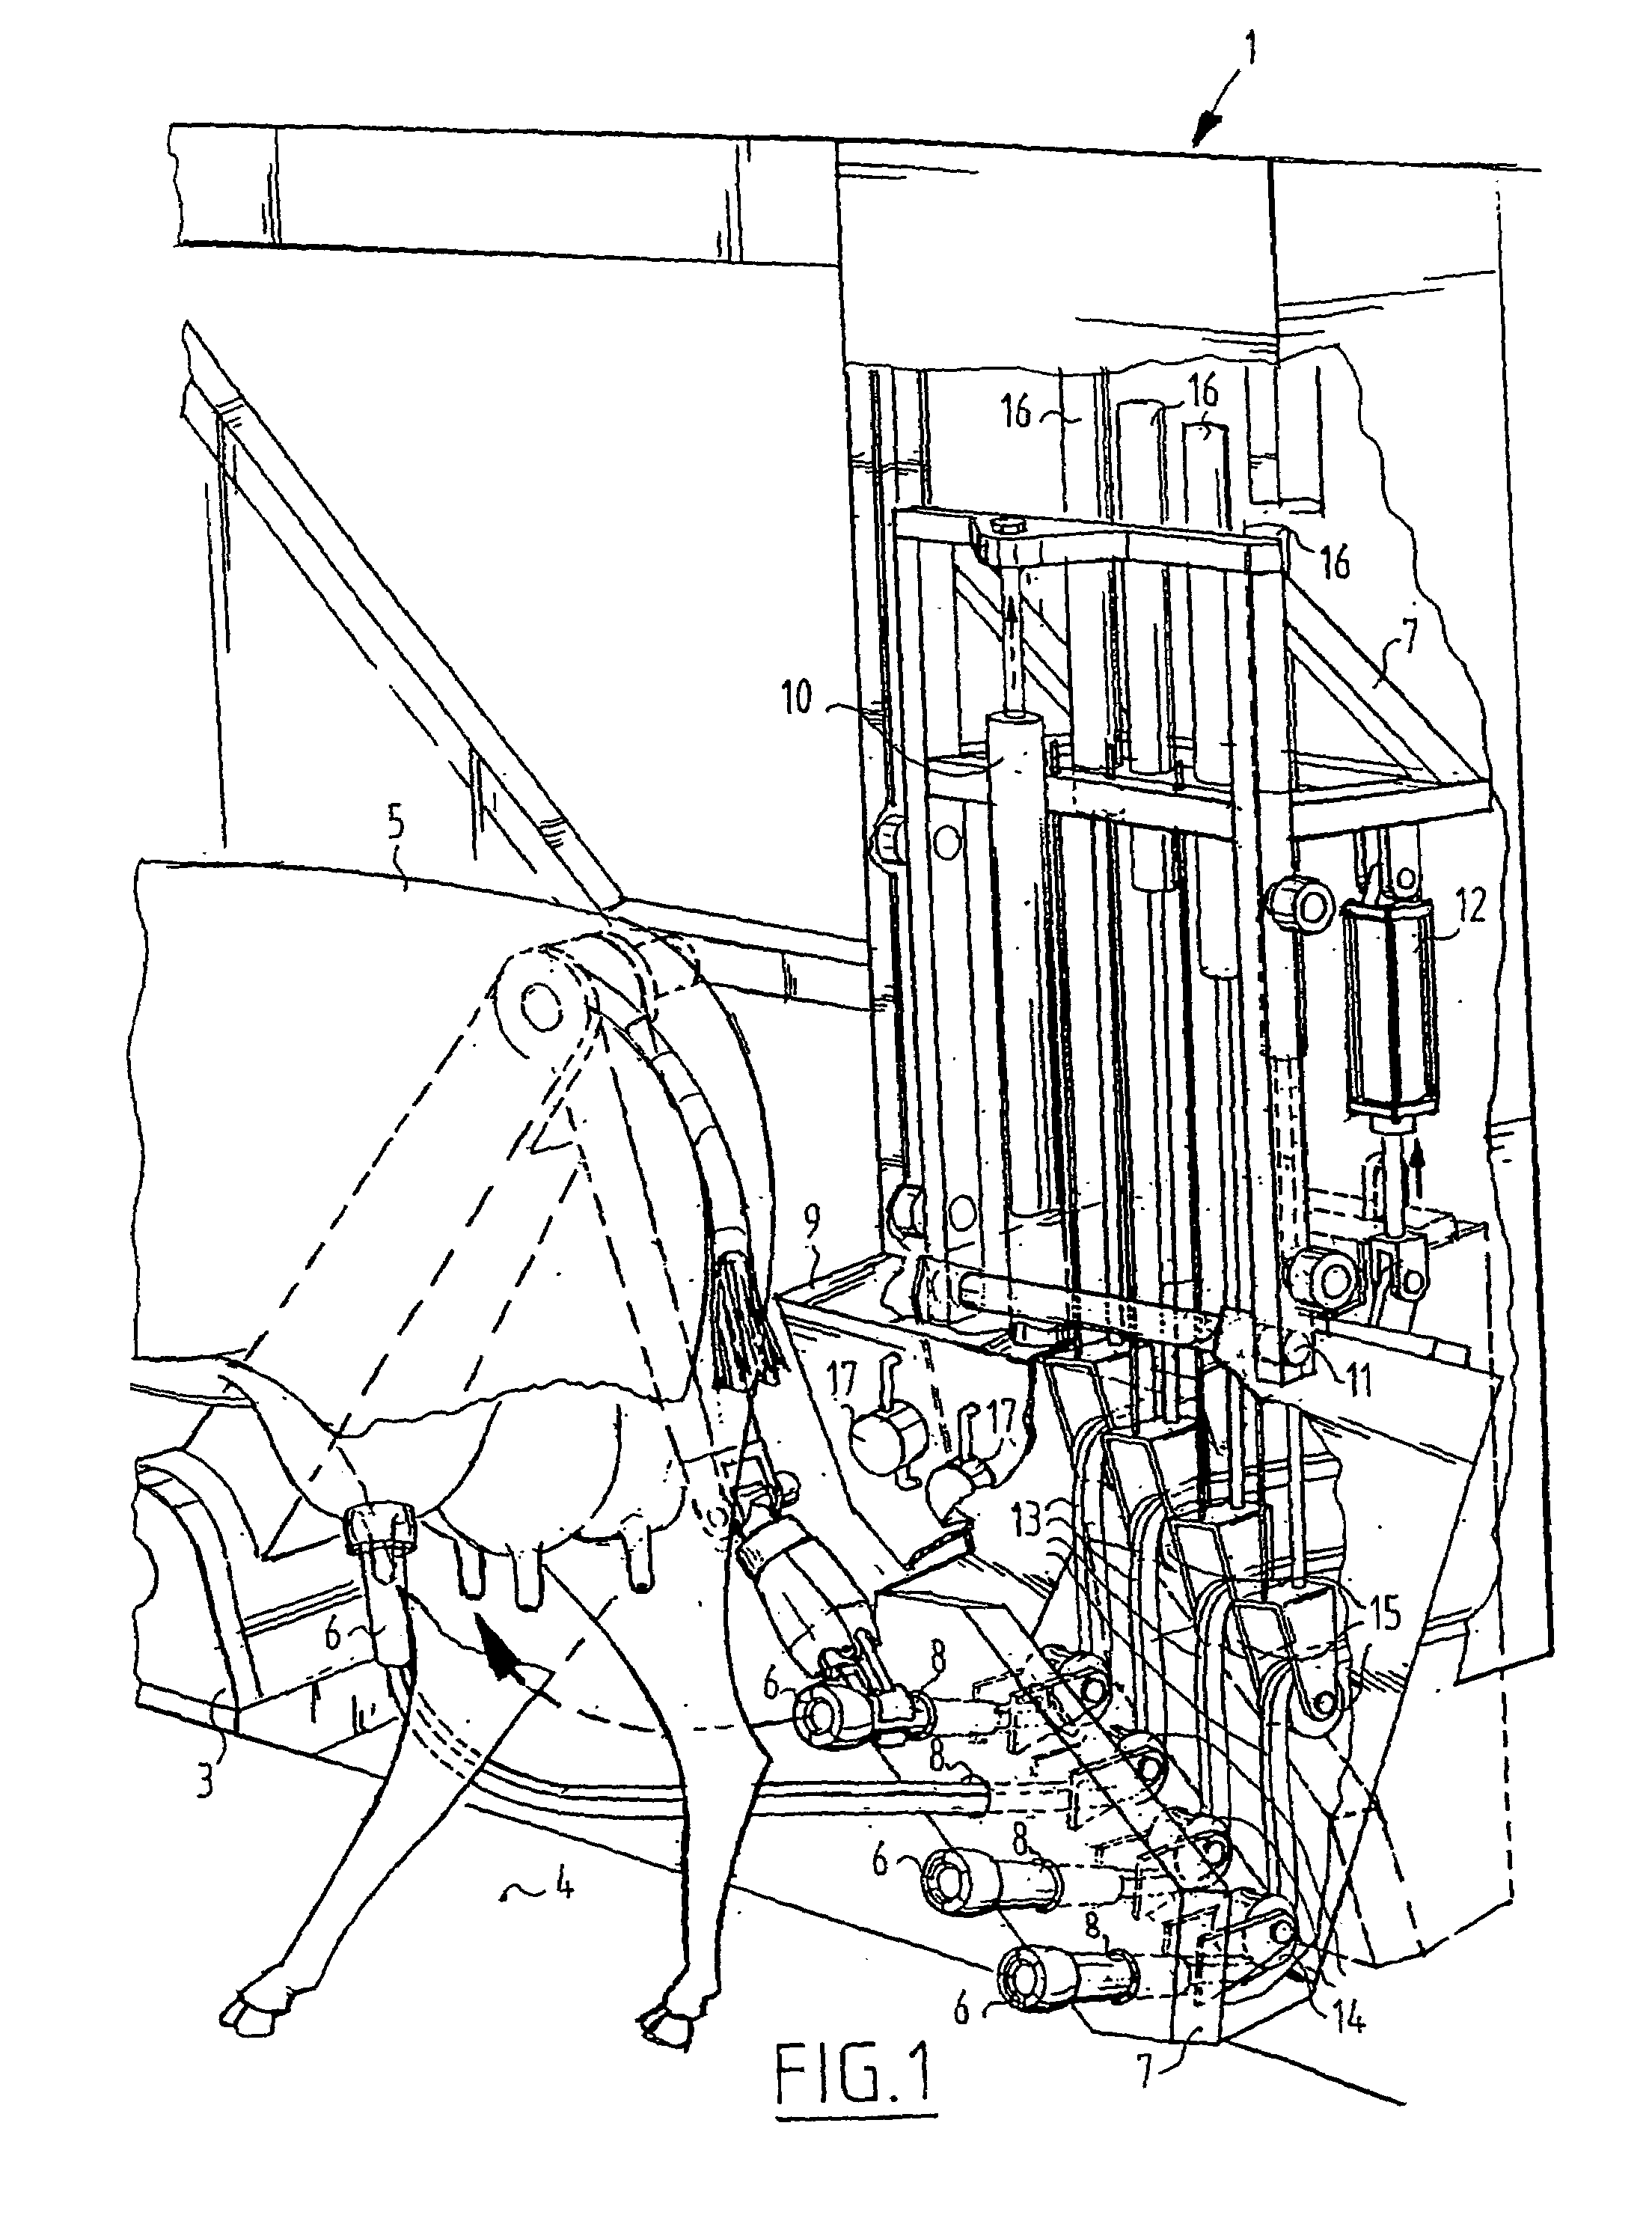 Milking apparatus and holder for receiving teat cups